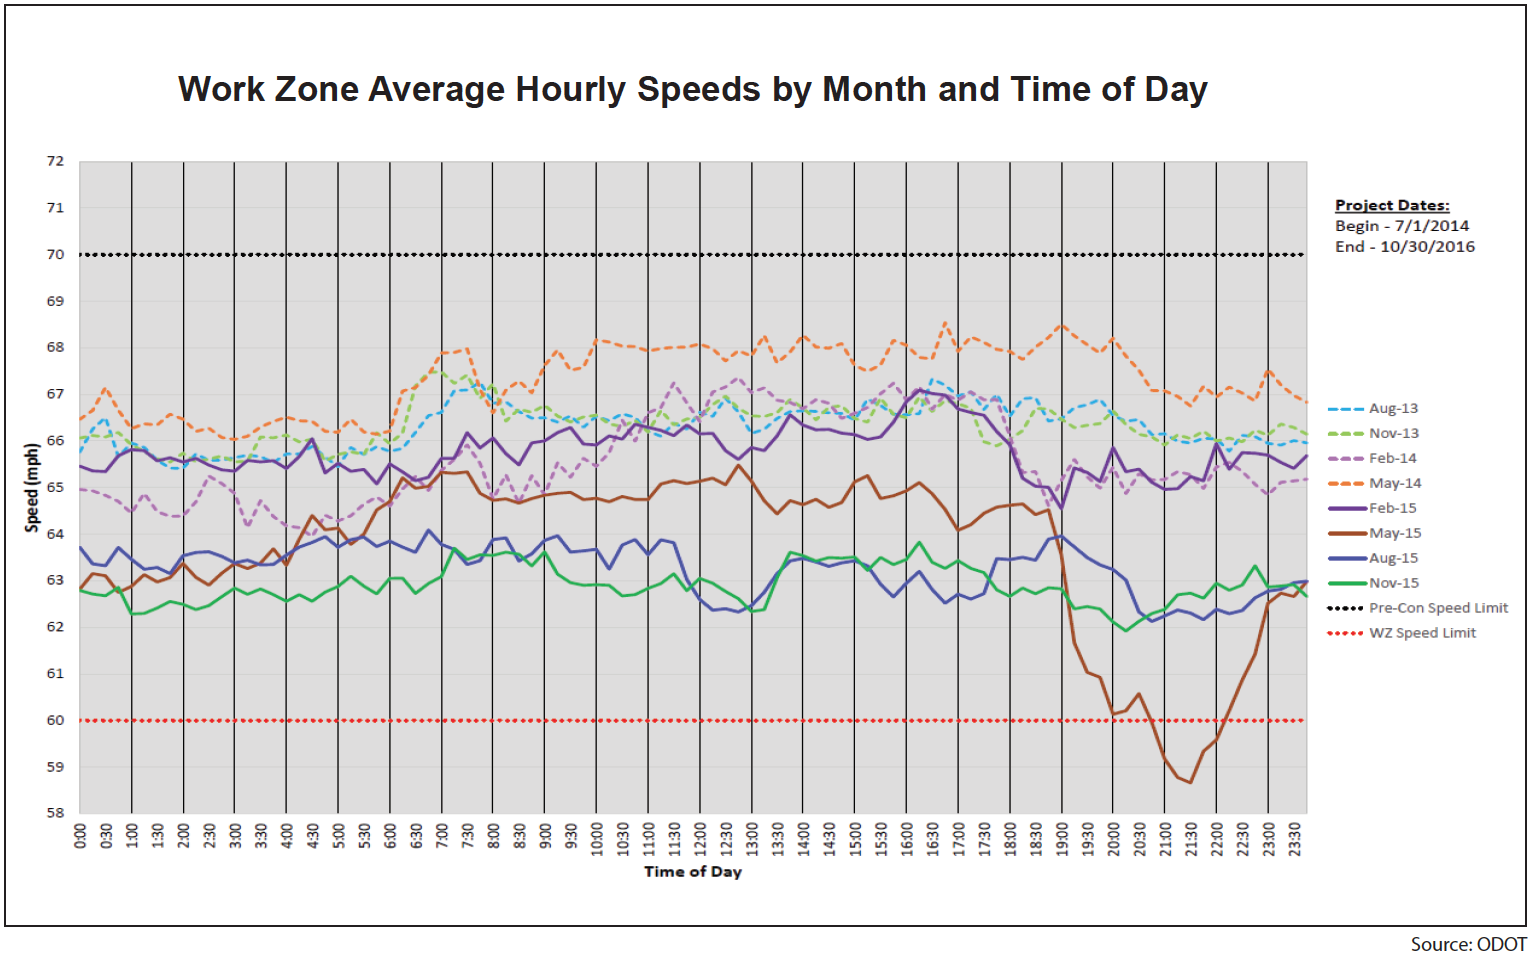 Example graph showing work zone average hourly speeds by month and time of day.